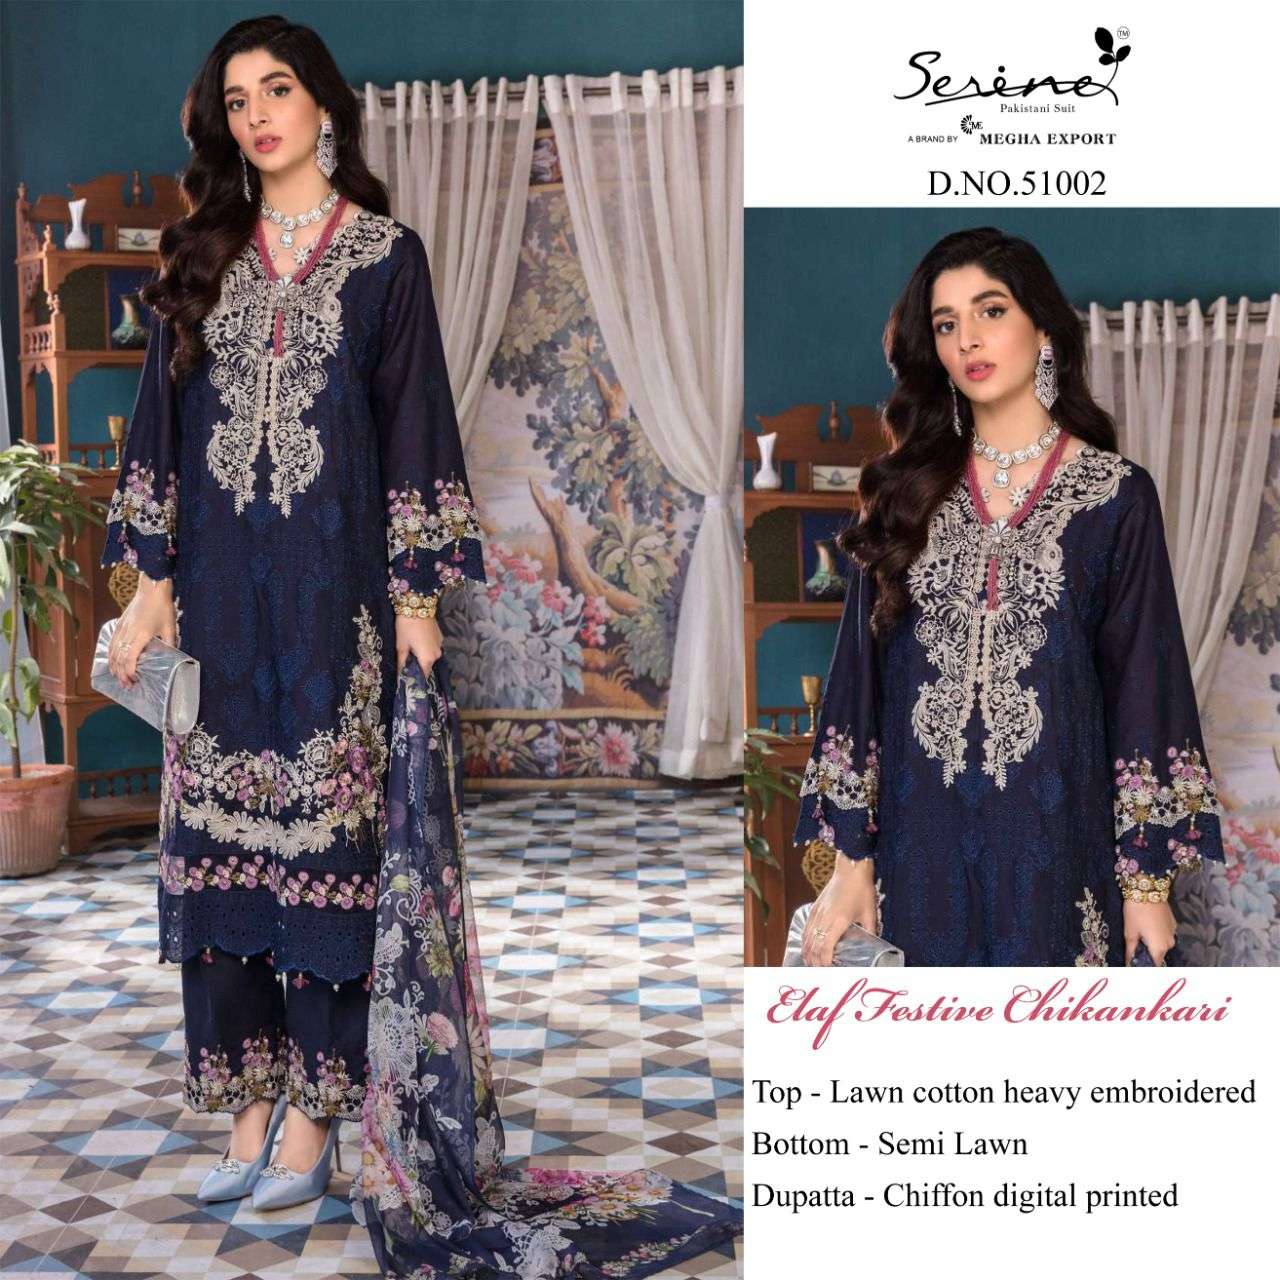 elaf festive chickenkari by megha exports lawn cotton embroidery pakistani suits